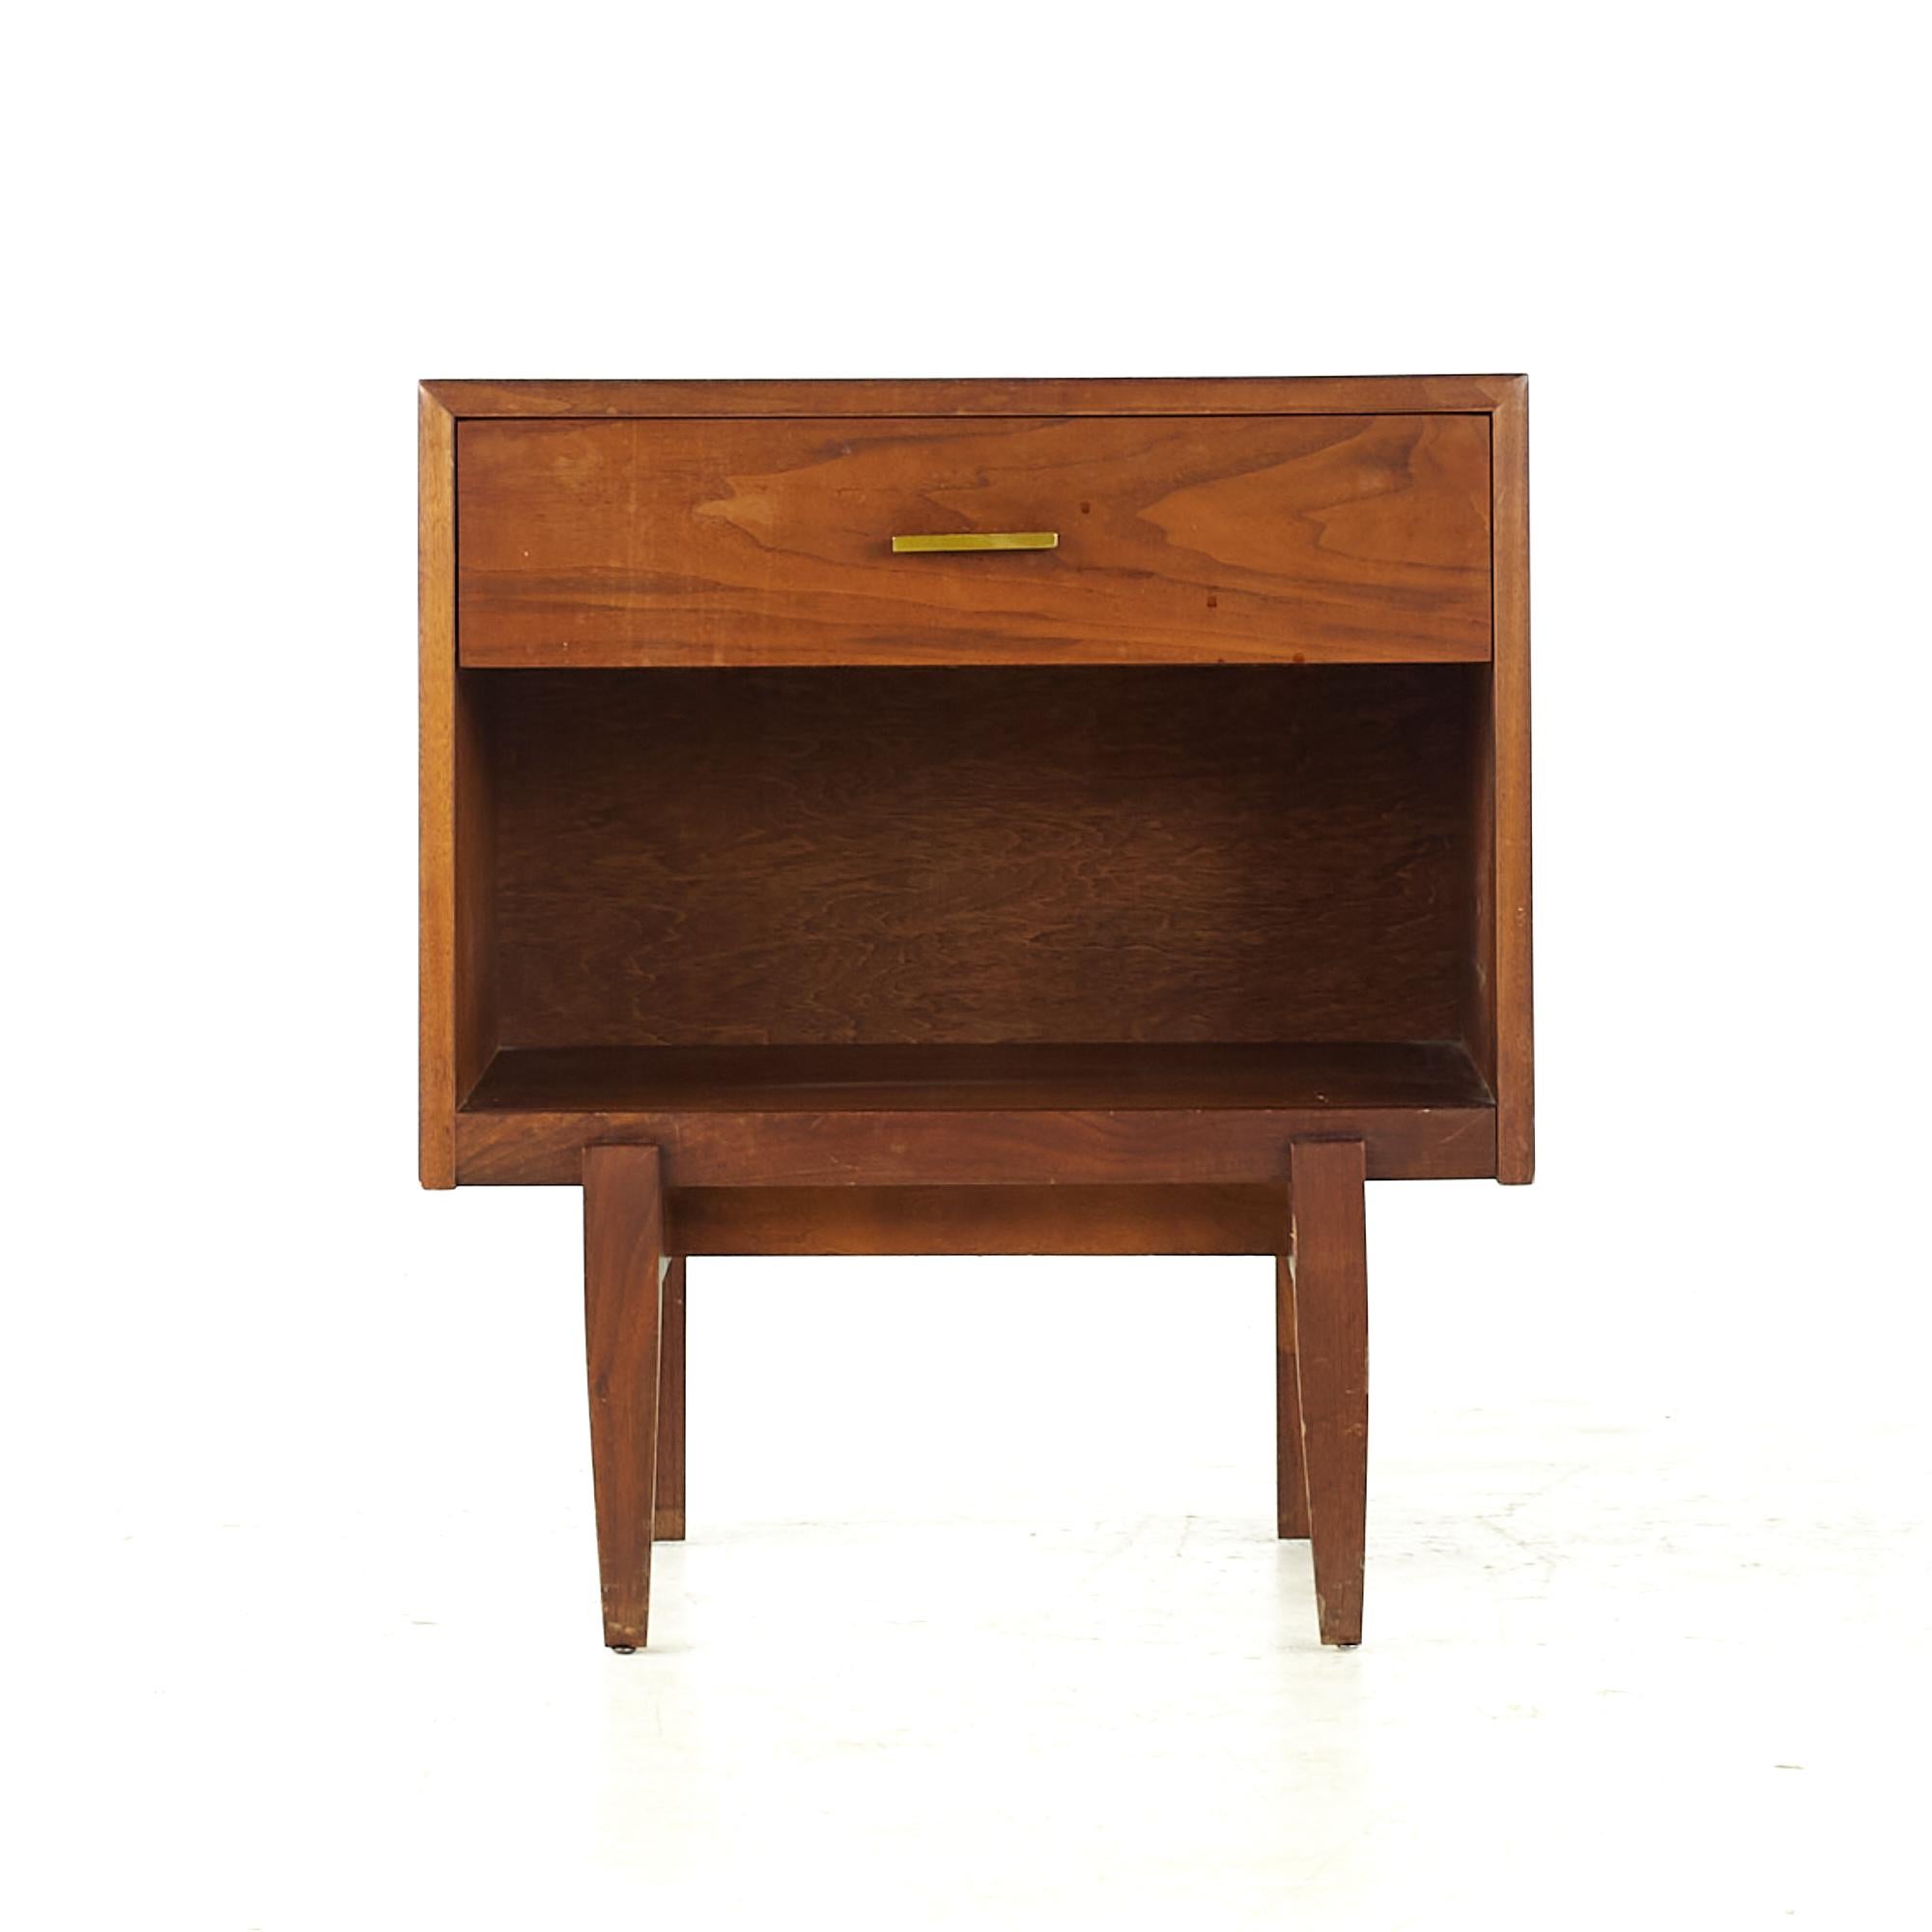 Ramseur midcentury Walnut and Brass Nightstand

This nightstand measures: 22 wide x 16 deep x 25.25 inches high

All pieces of furniture can be had in what we call restored vintage condition. That means the piece is restored upon purchase so